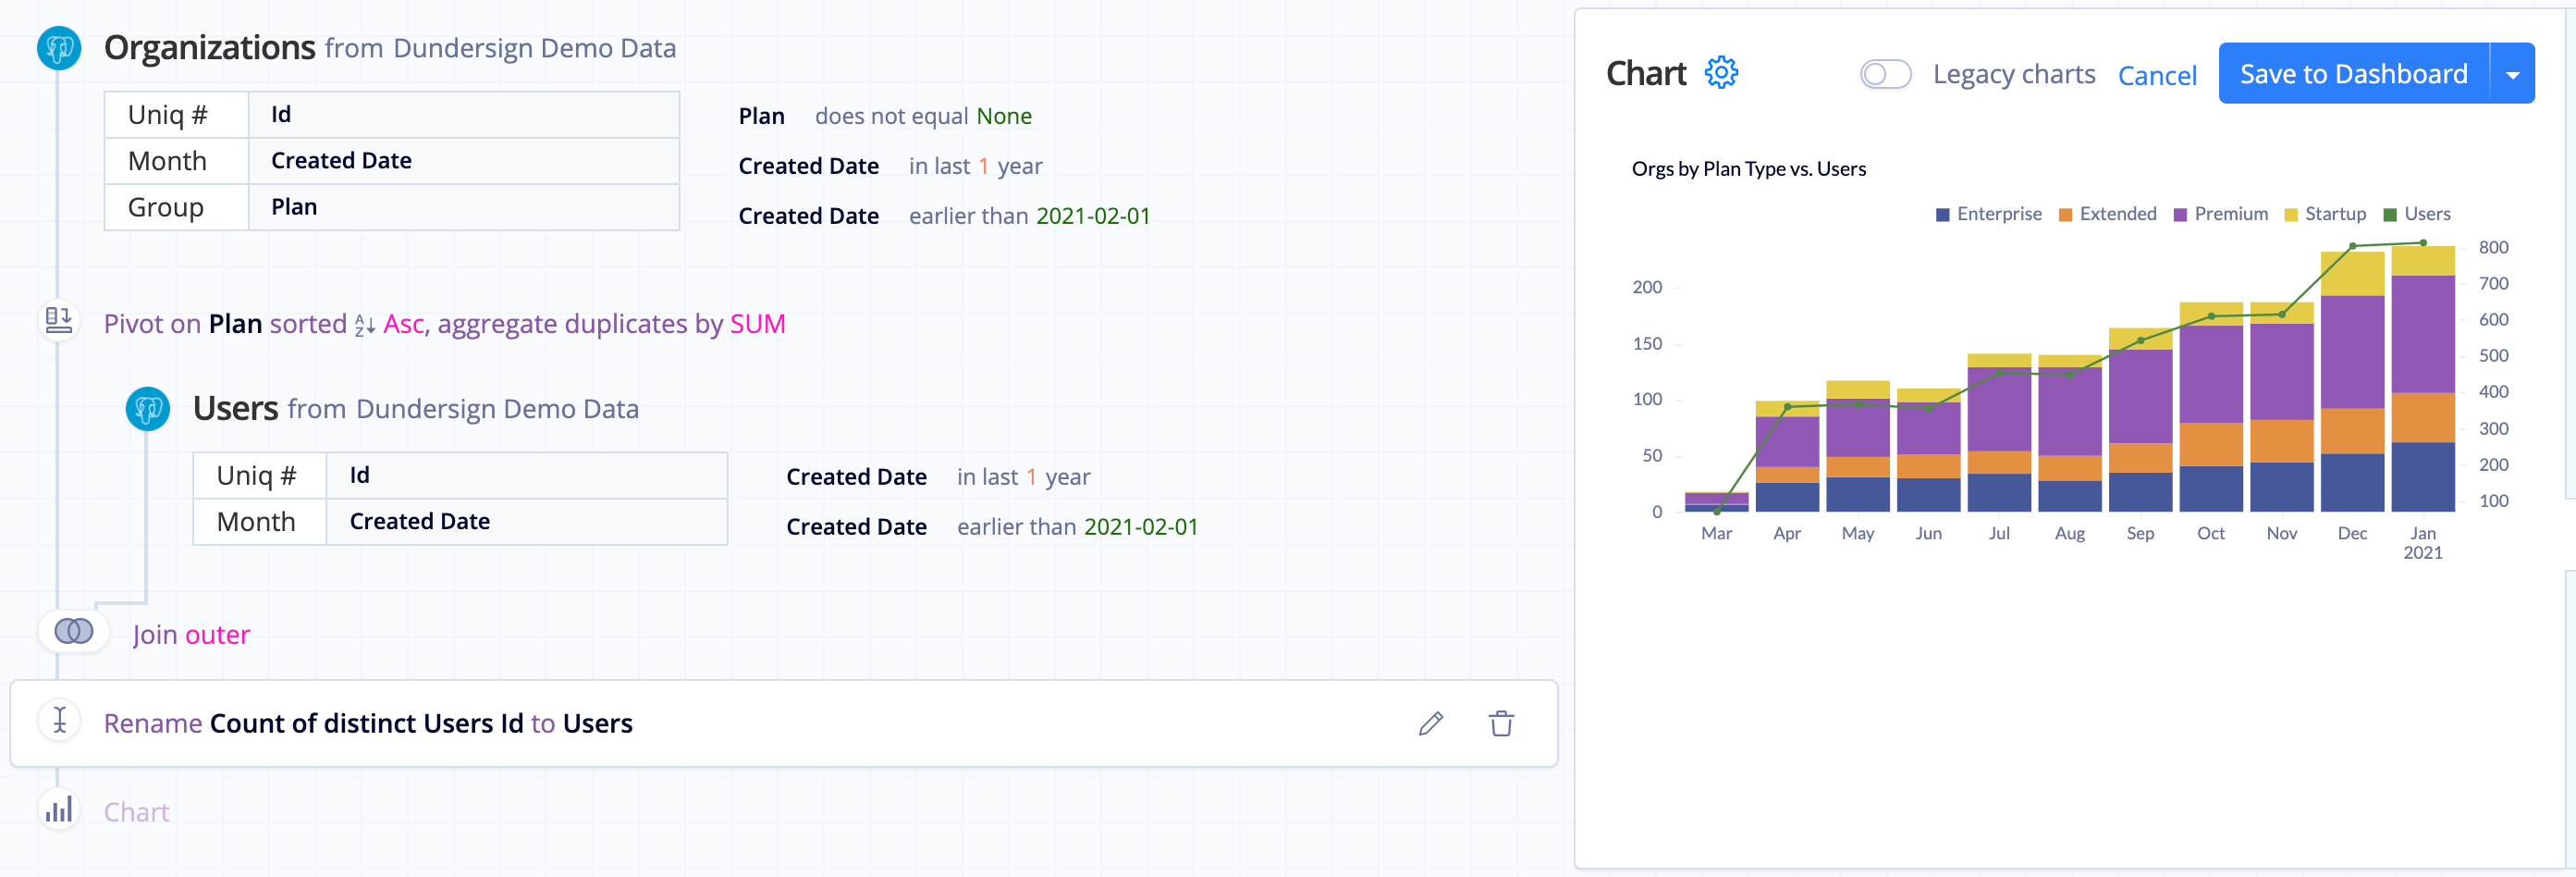 Advanced Pipeline in chart editor - two Queries, three transformation steps, and final chart